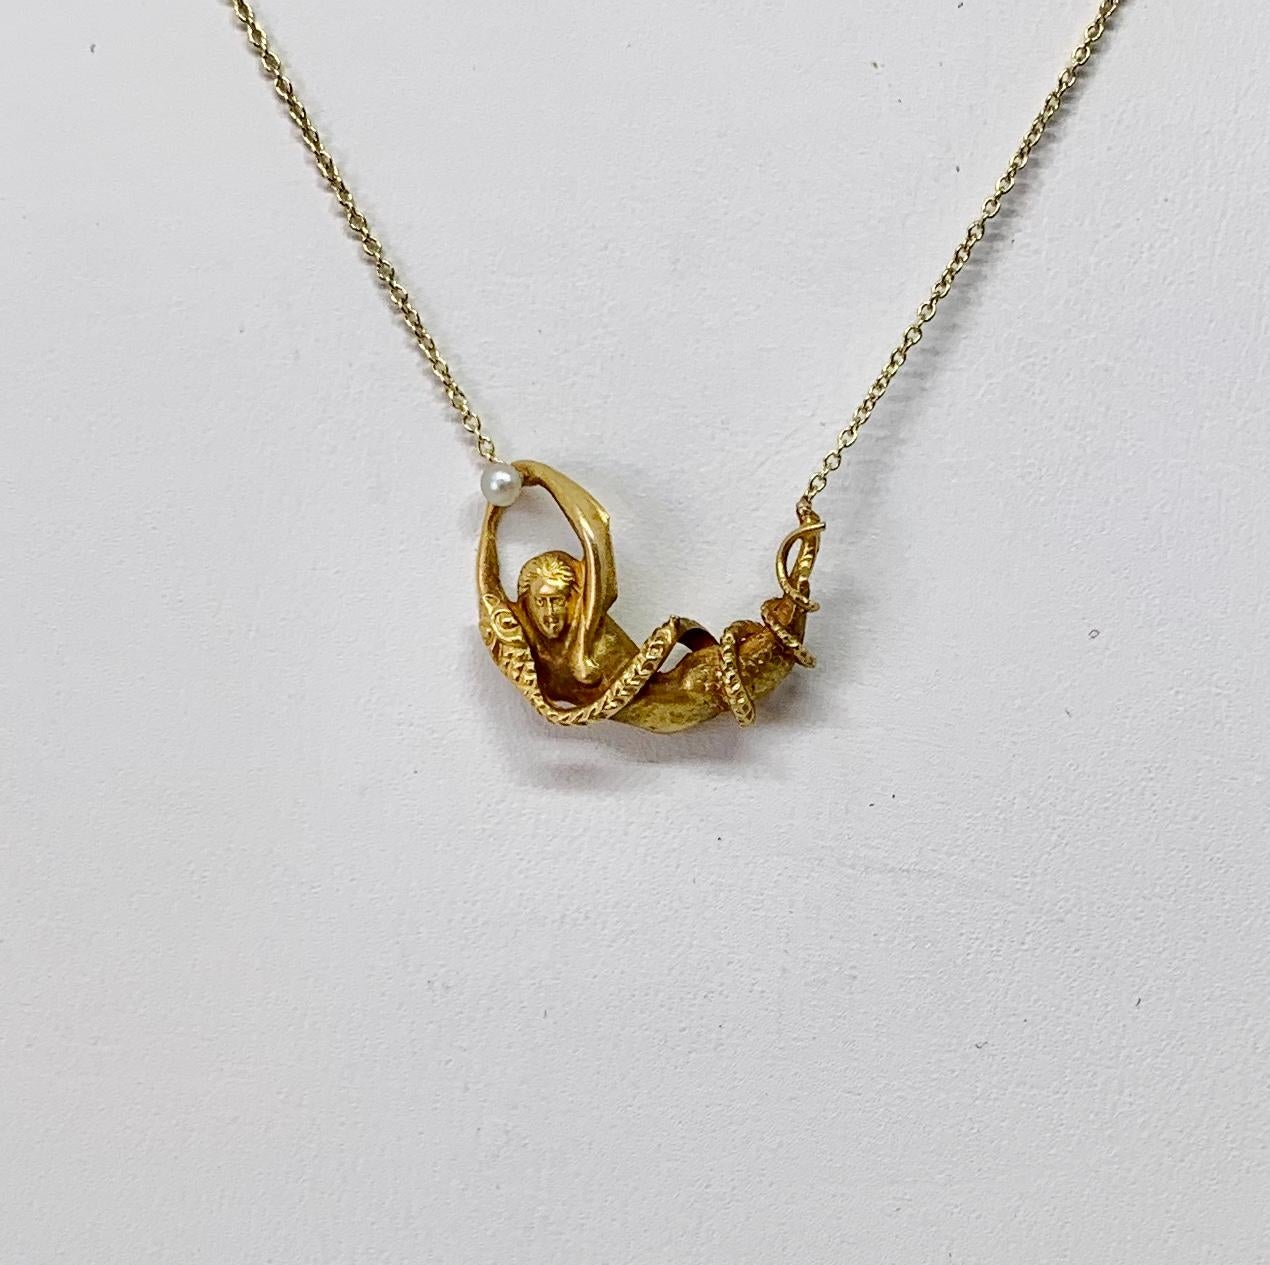 This is a rare antique Victorian Mermaid and Snake Pendant Necklace depicting a snake or serpent wrapped around a mermaid holding a pearl in her hand.  This is extraordinary imagery in this antique jewel that is over 100 years old.  Mermaids